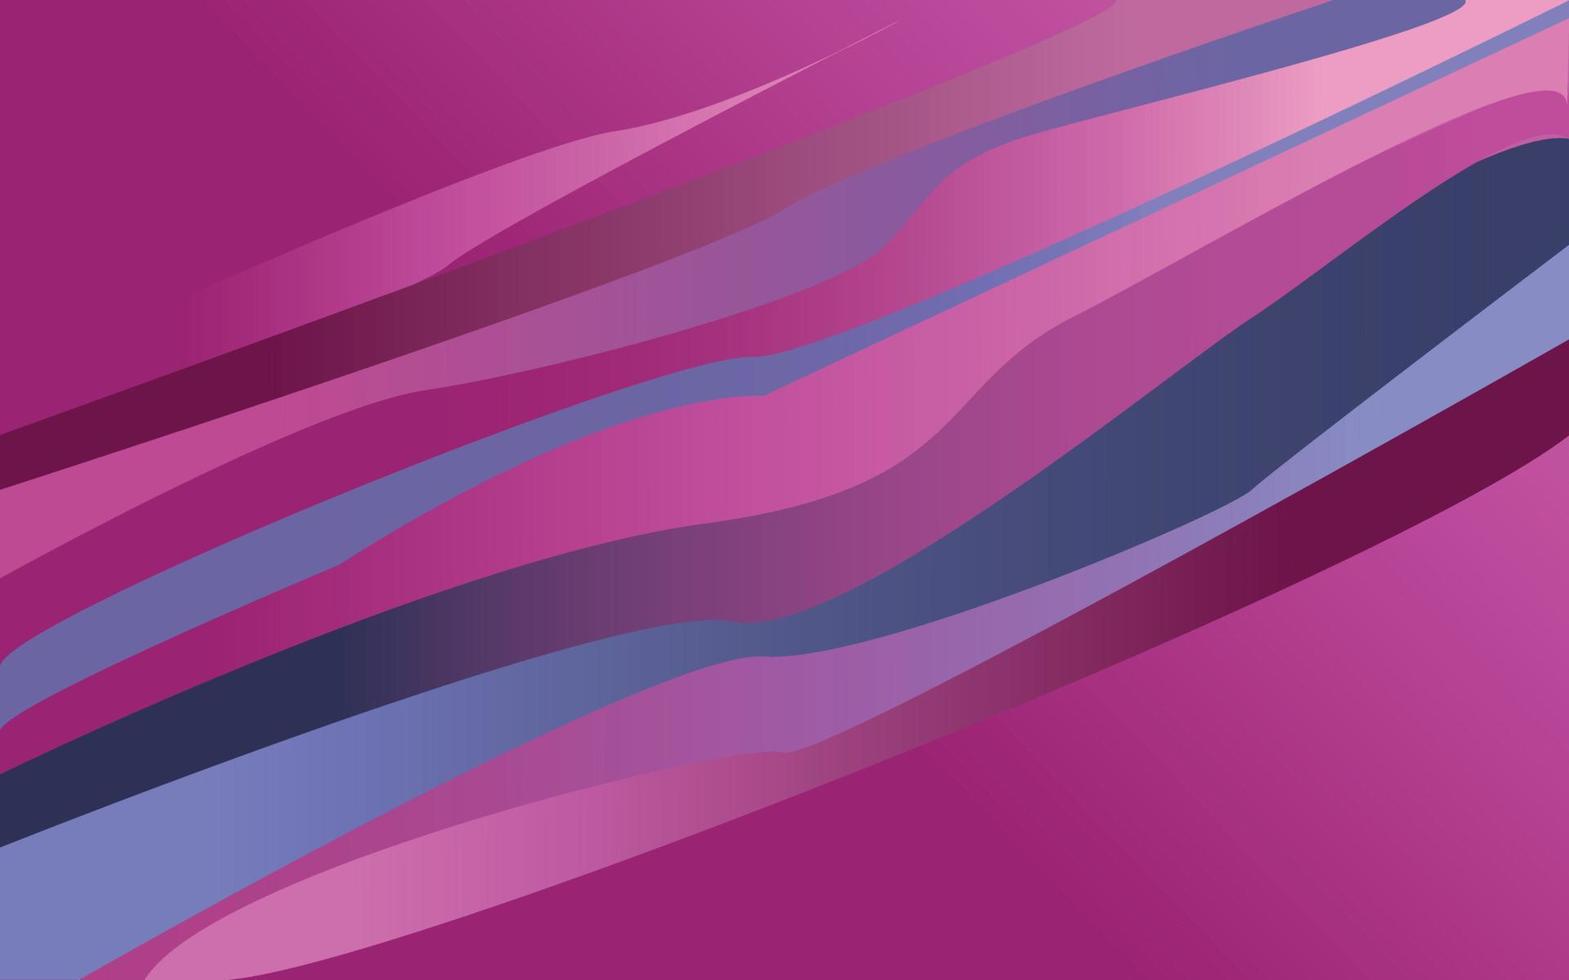 Abstract horizontal line background. Curved layers in vibrant pink and violet tones. Artistic vector illustration.